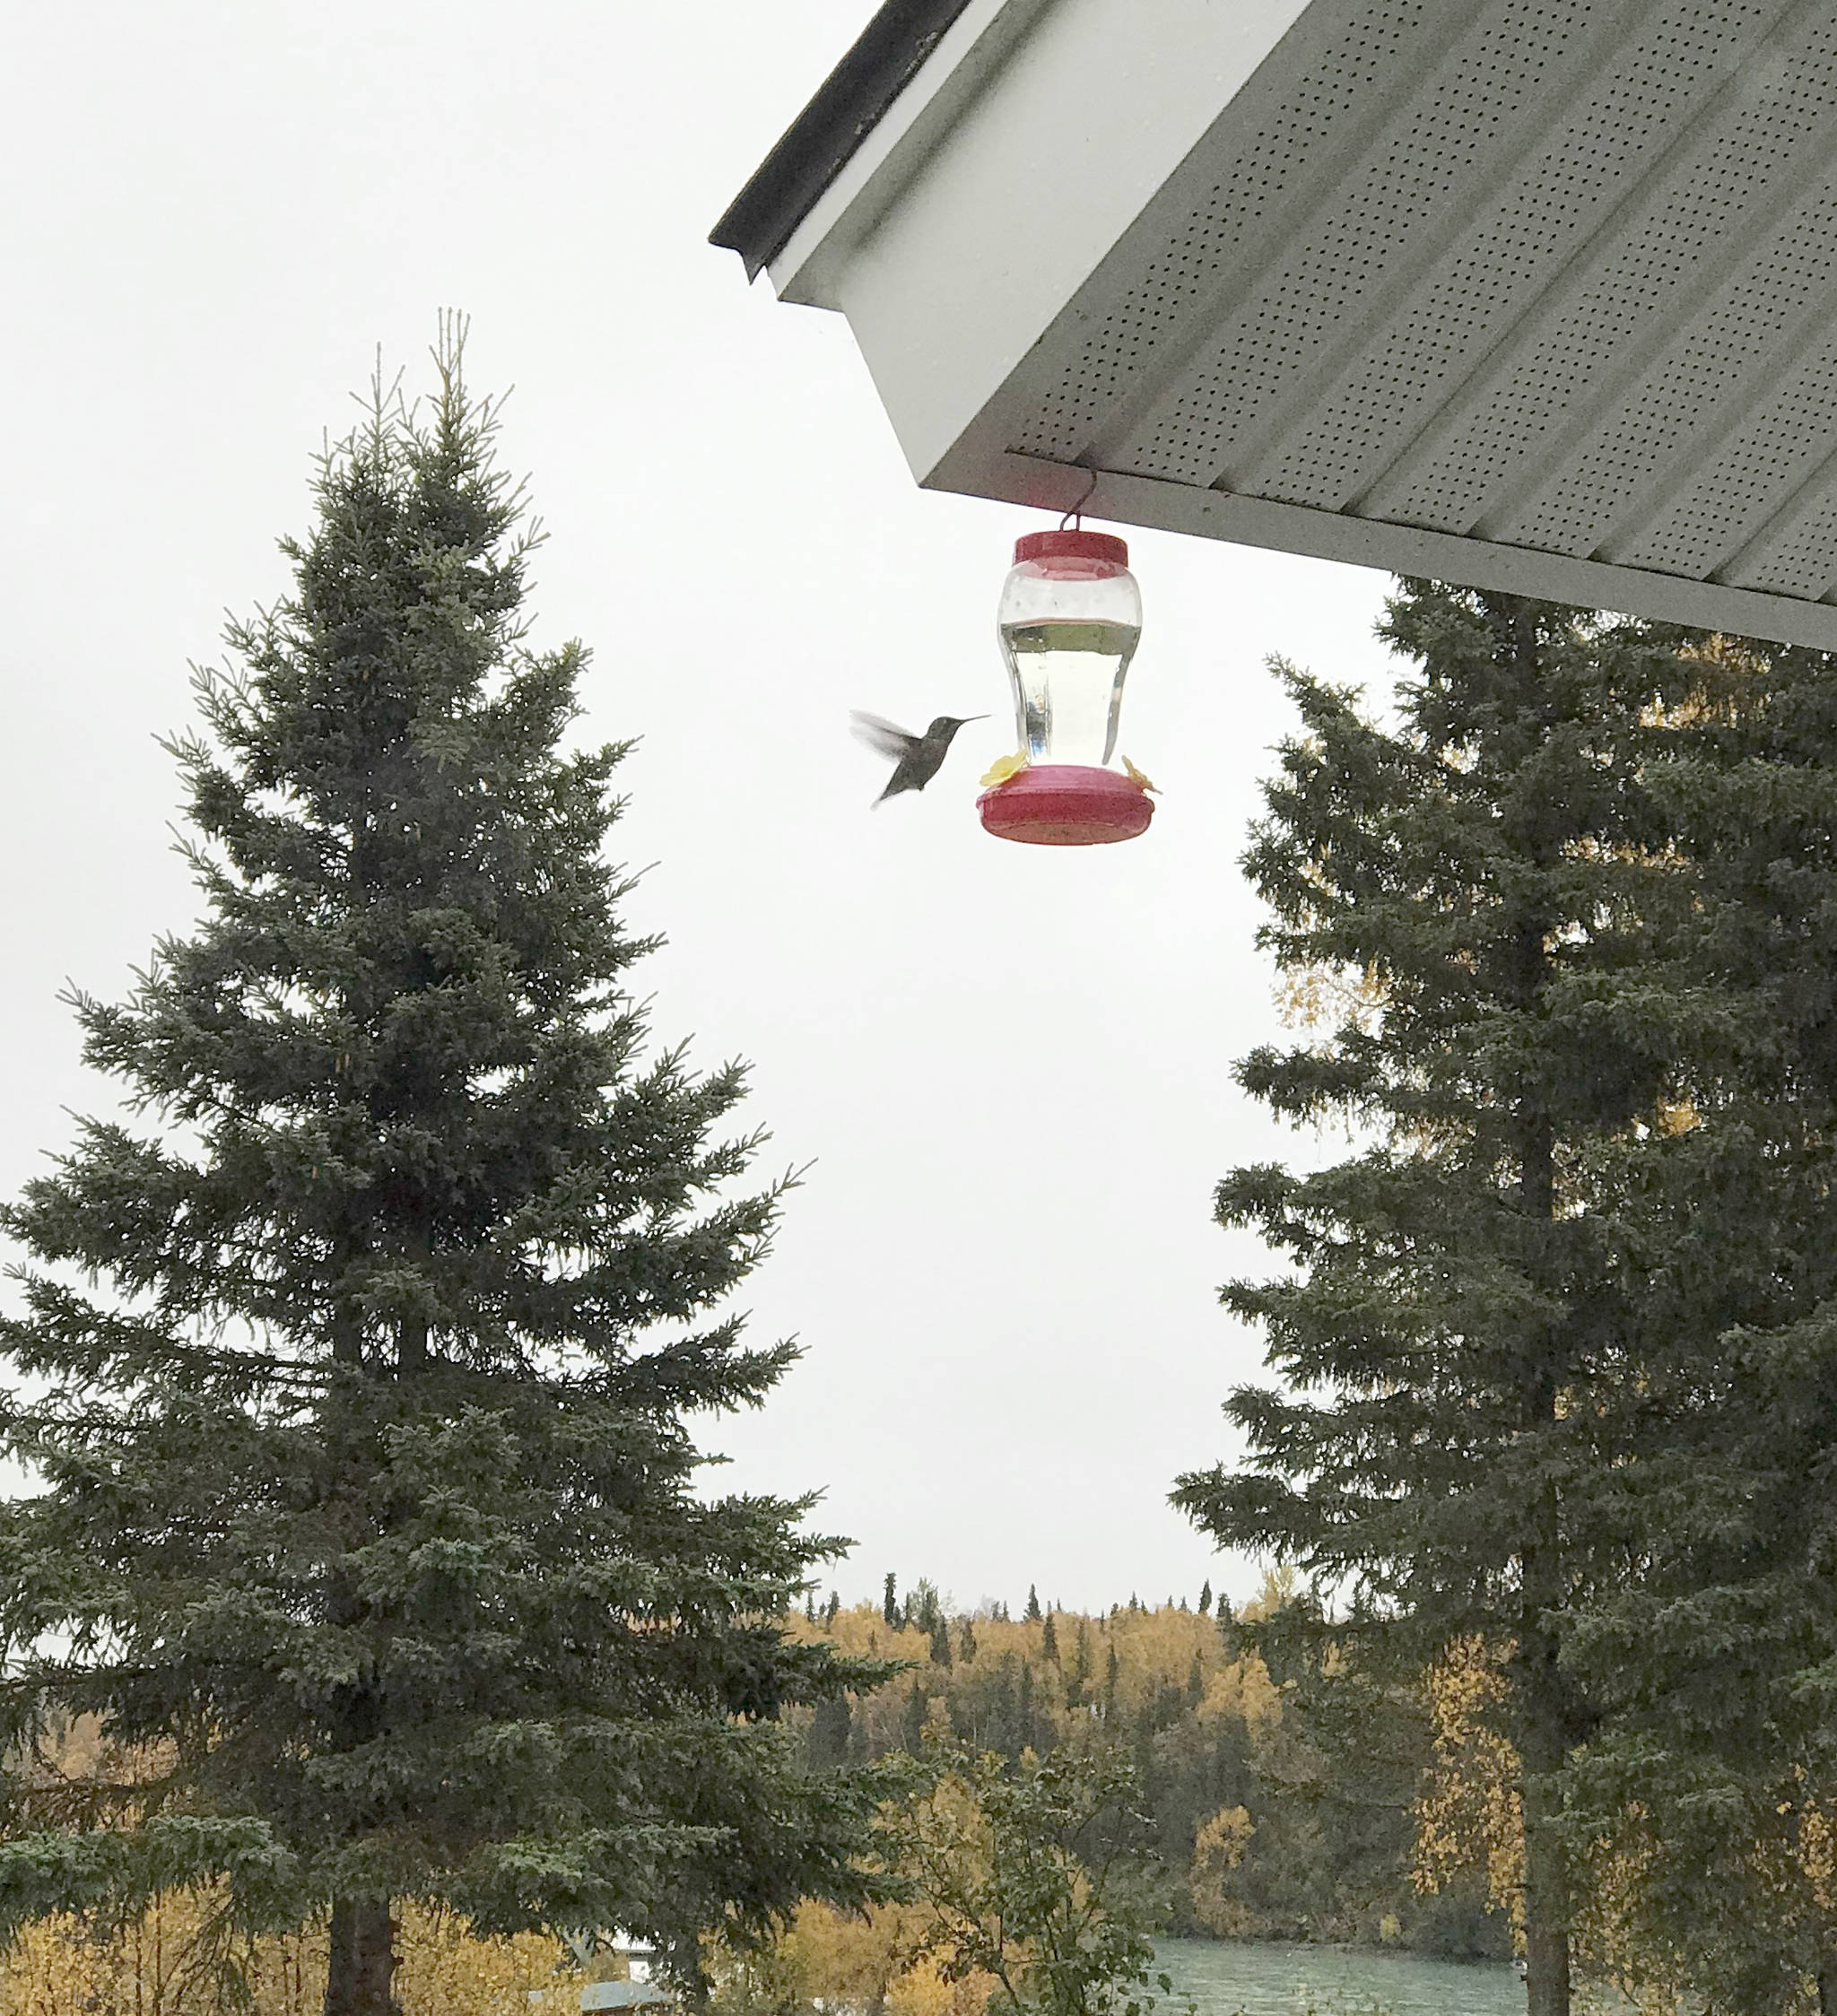 An Anna’s hummingbird nicknamed “Sugar Petal” visits a feeder in Kenai on a blustery day in September. (Photo provided by Breanna Bloom)